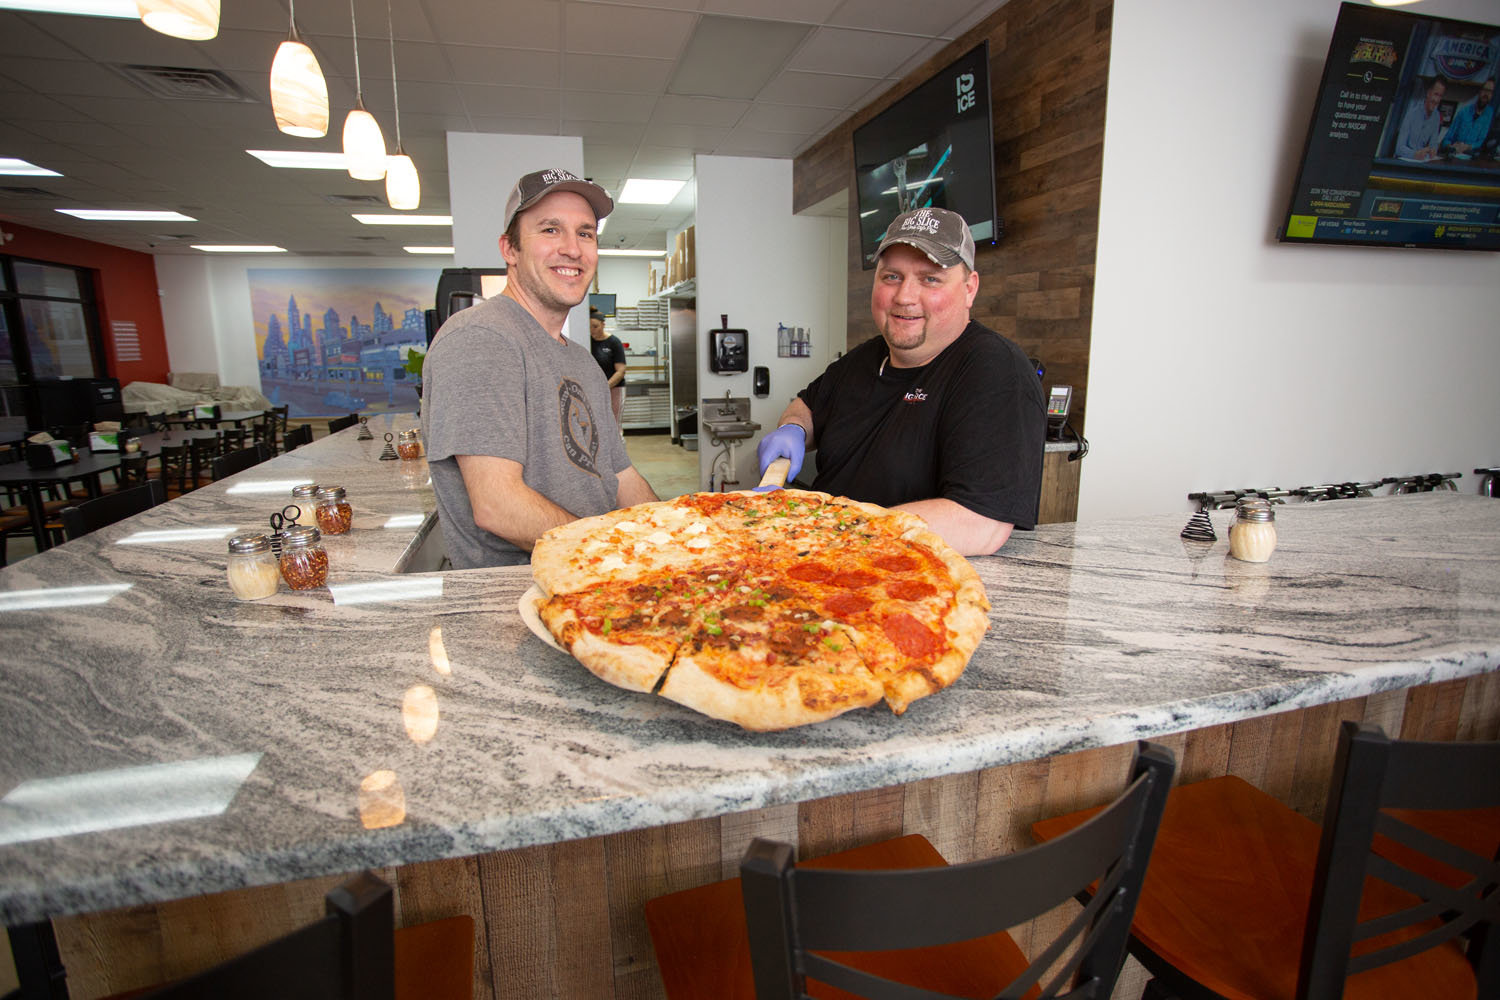 FOOD FRANCHISE: The Big Slice owner Levi Grant, left, is working to franchise the concept, starting with Justin Kennedy as a partner.